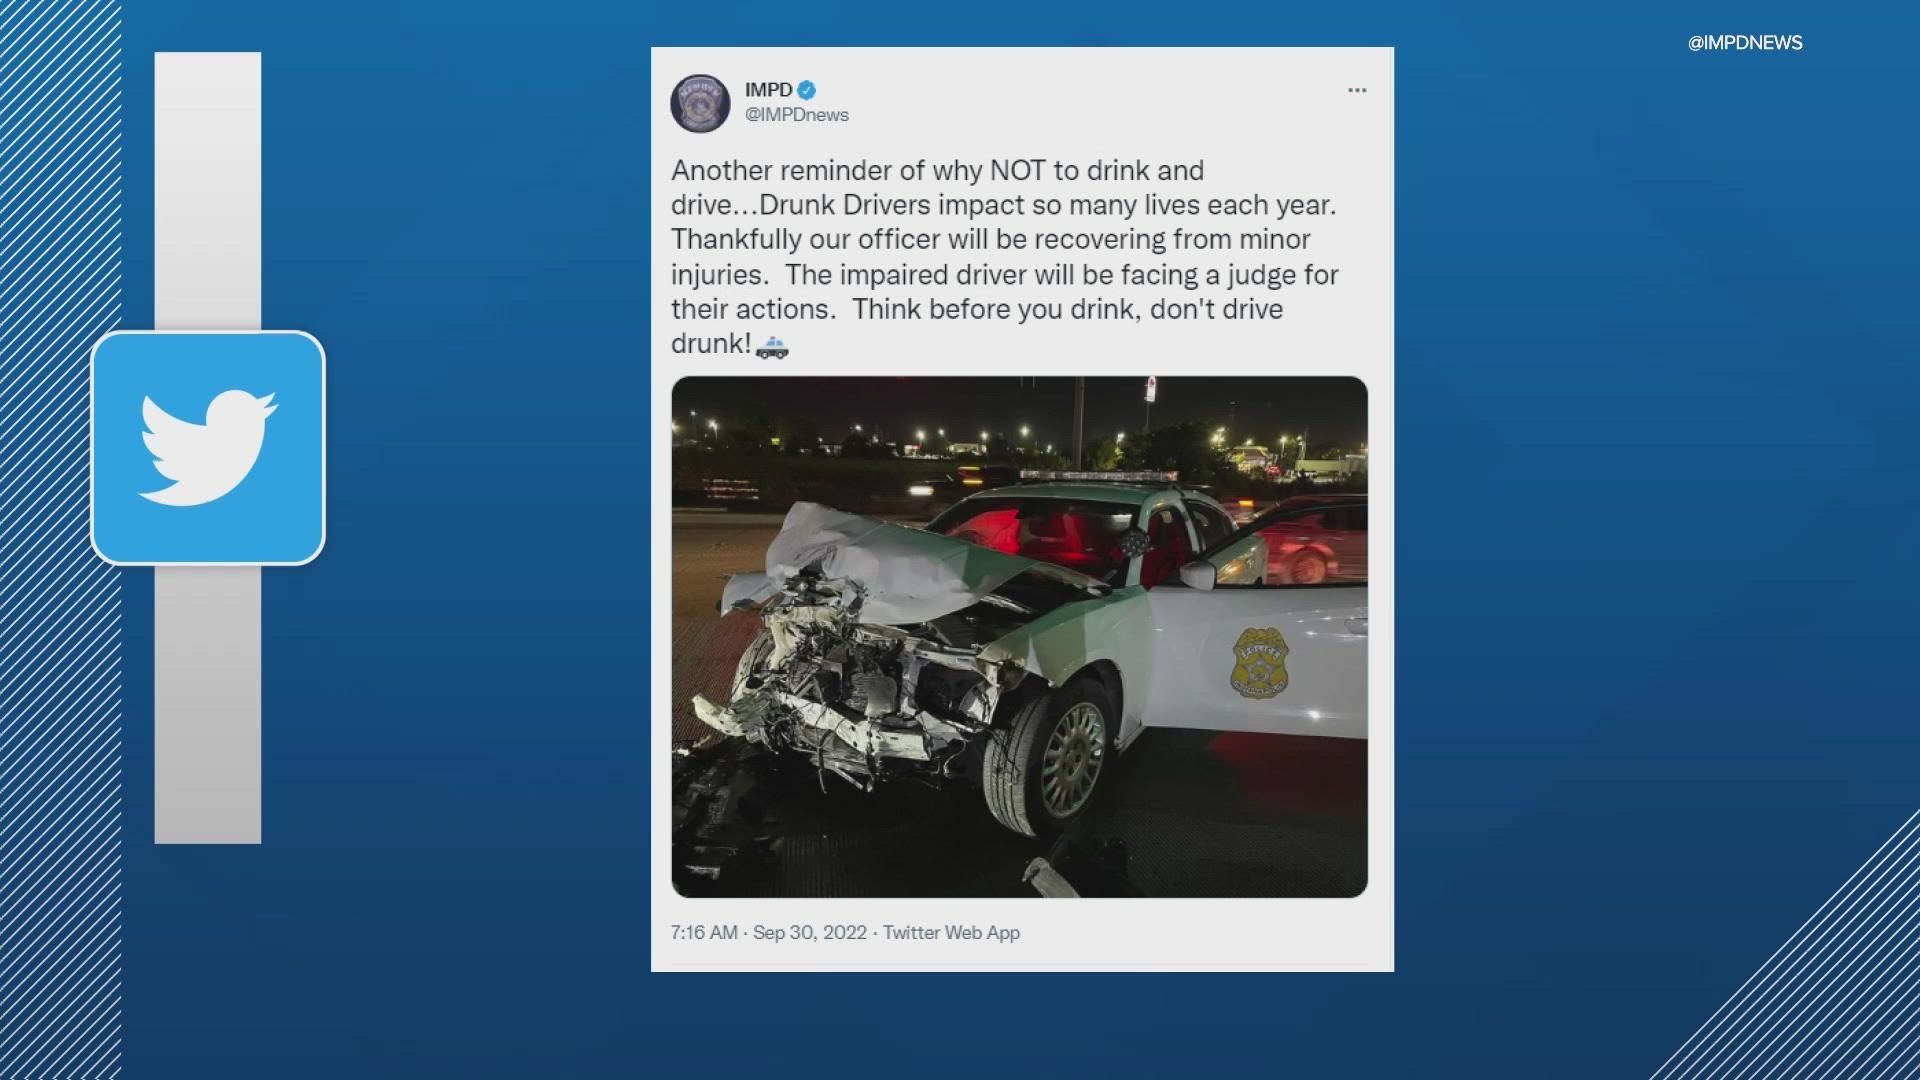 A Metro Police officer is recovering tonight from minor injuries after investigators say they were hit by a drunk driver.